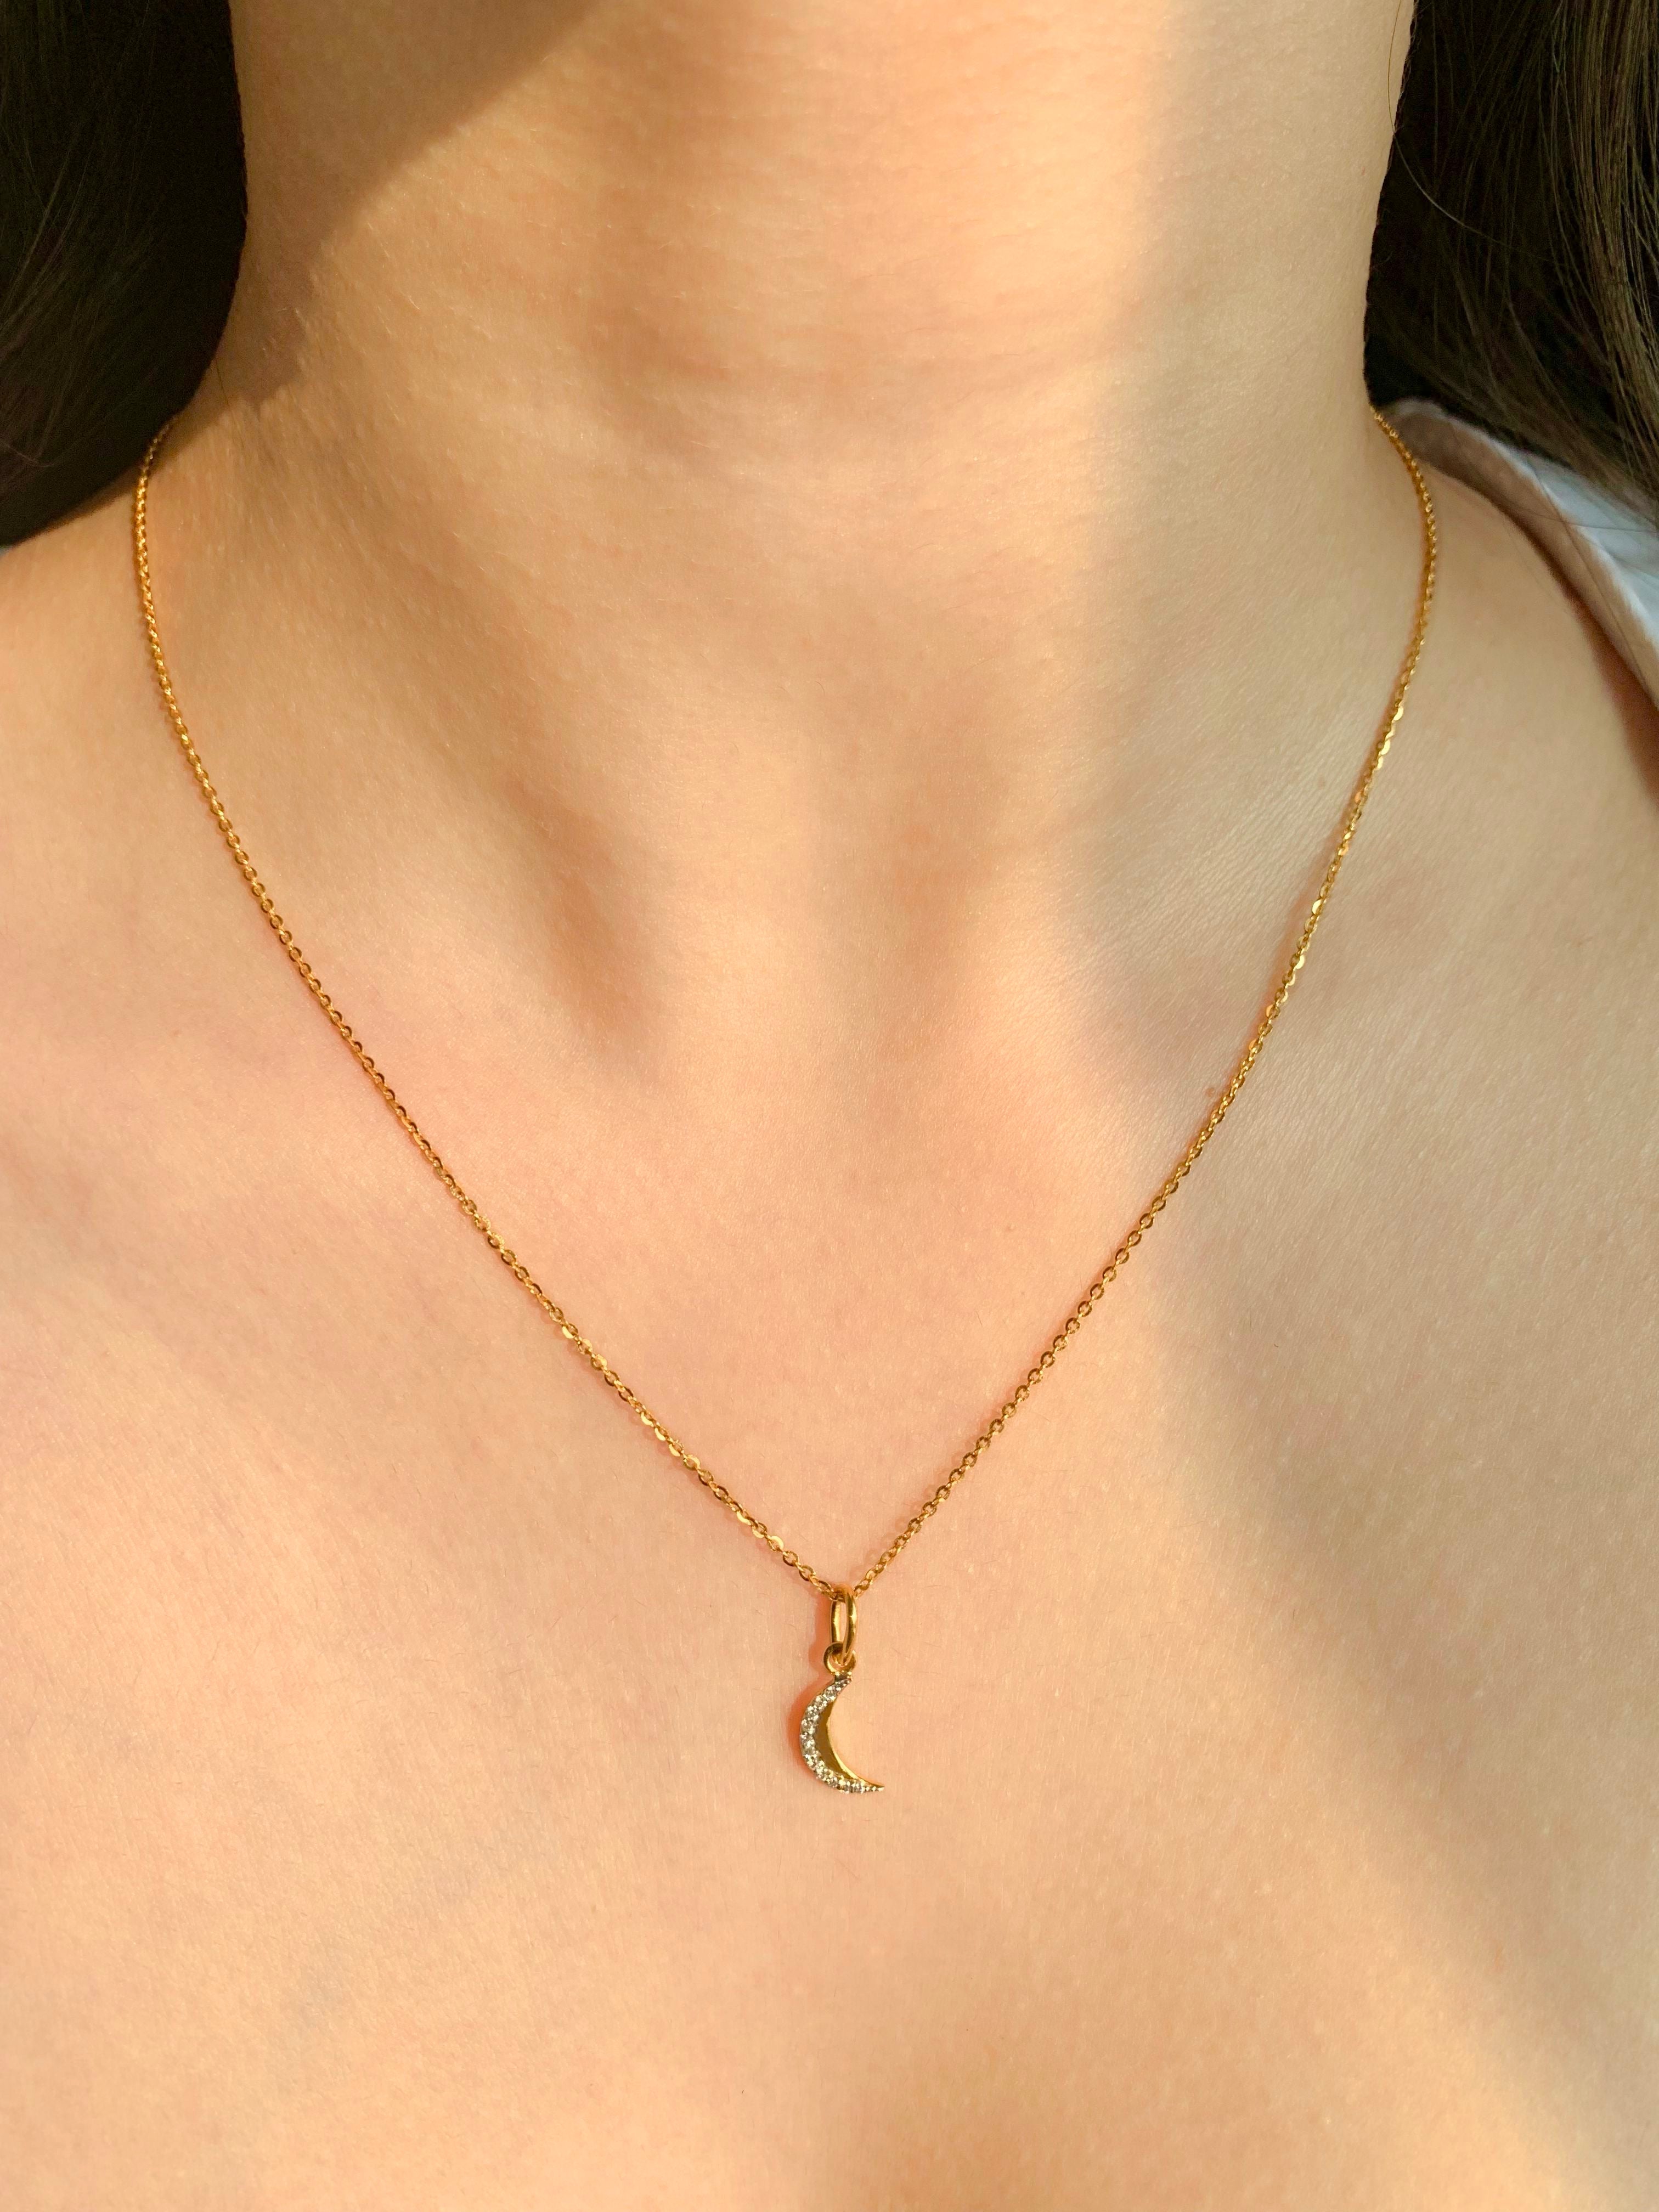 Solid Gold Moon Pendant, Crescent Moon Necklace, Celestial Charm, Gift For  Her, Prom Night Pendants & Lockets